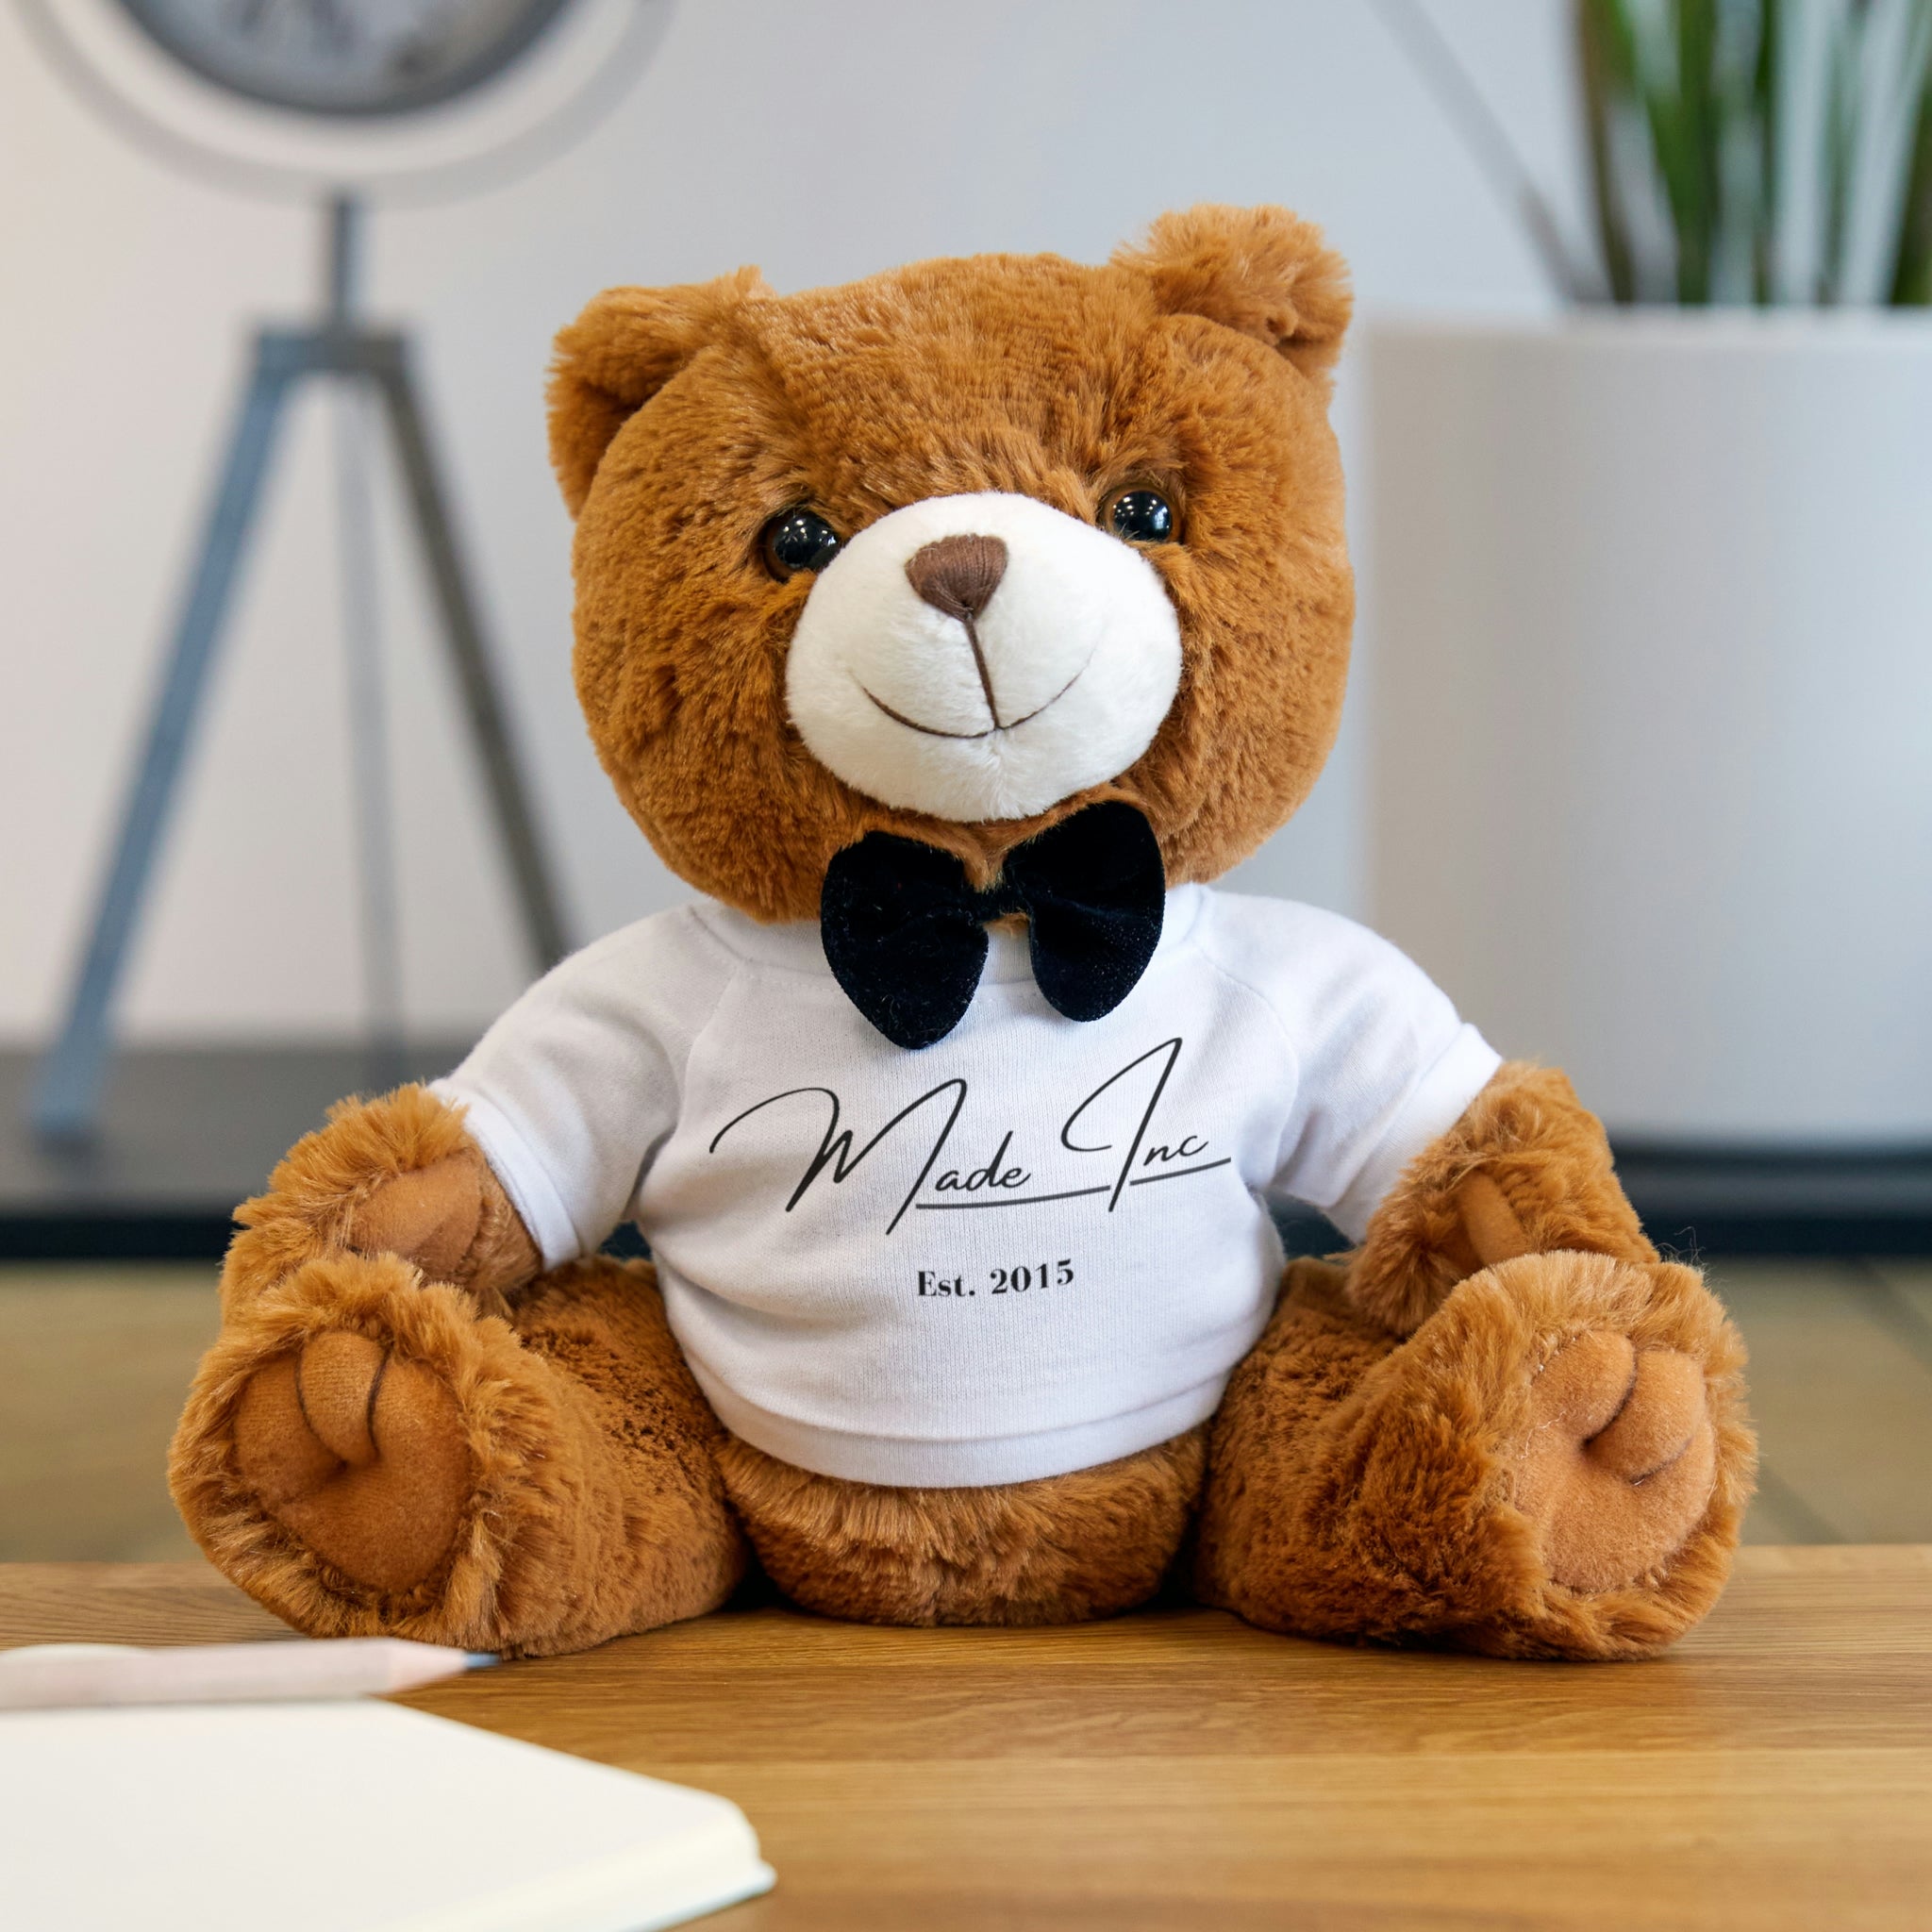 Image of a 7" by 10" teddy bear wearing a custom t-shirt, adorned with a charming bow. Made with luxuriously soft synthetic fur and 100% polyester filling, perfect for any celebration. brown plush teddy bear wearing a white Made Inc signature shirt and a black bow tie sitting on a hardwood floor in a studio